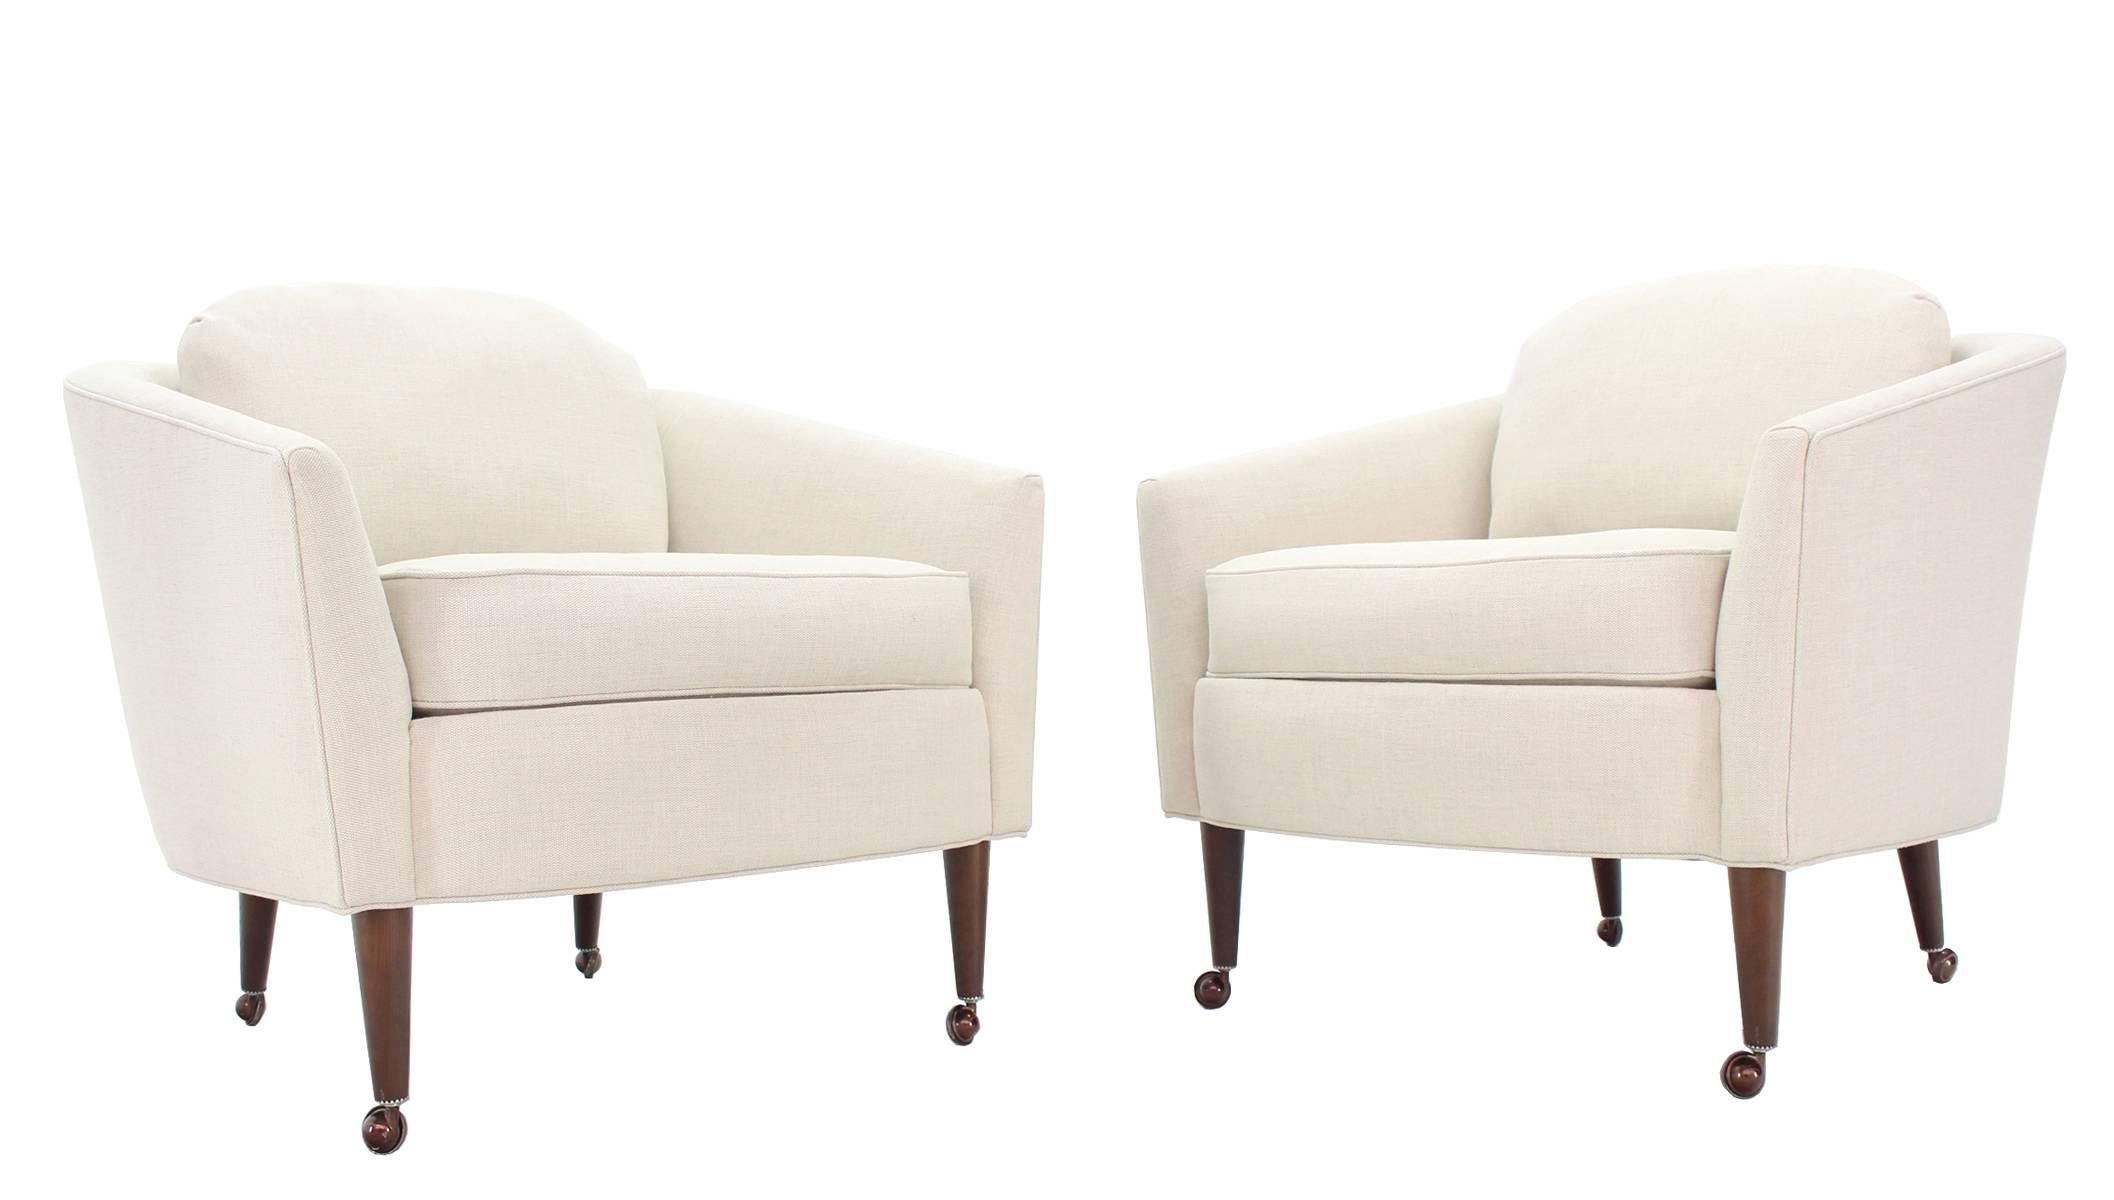 Pair of newly upholstered Mid-Century Modern barrel back chairs on oiled walnut legs.